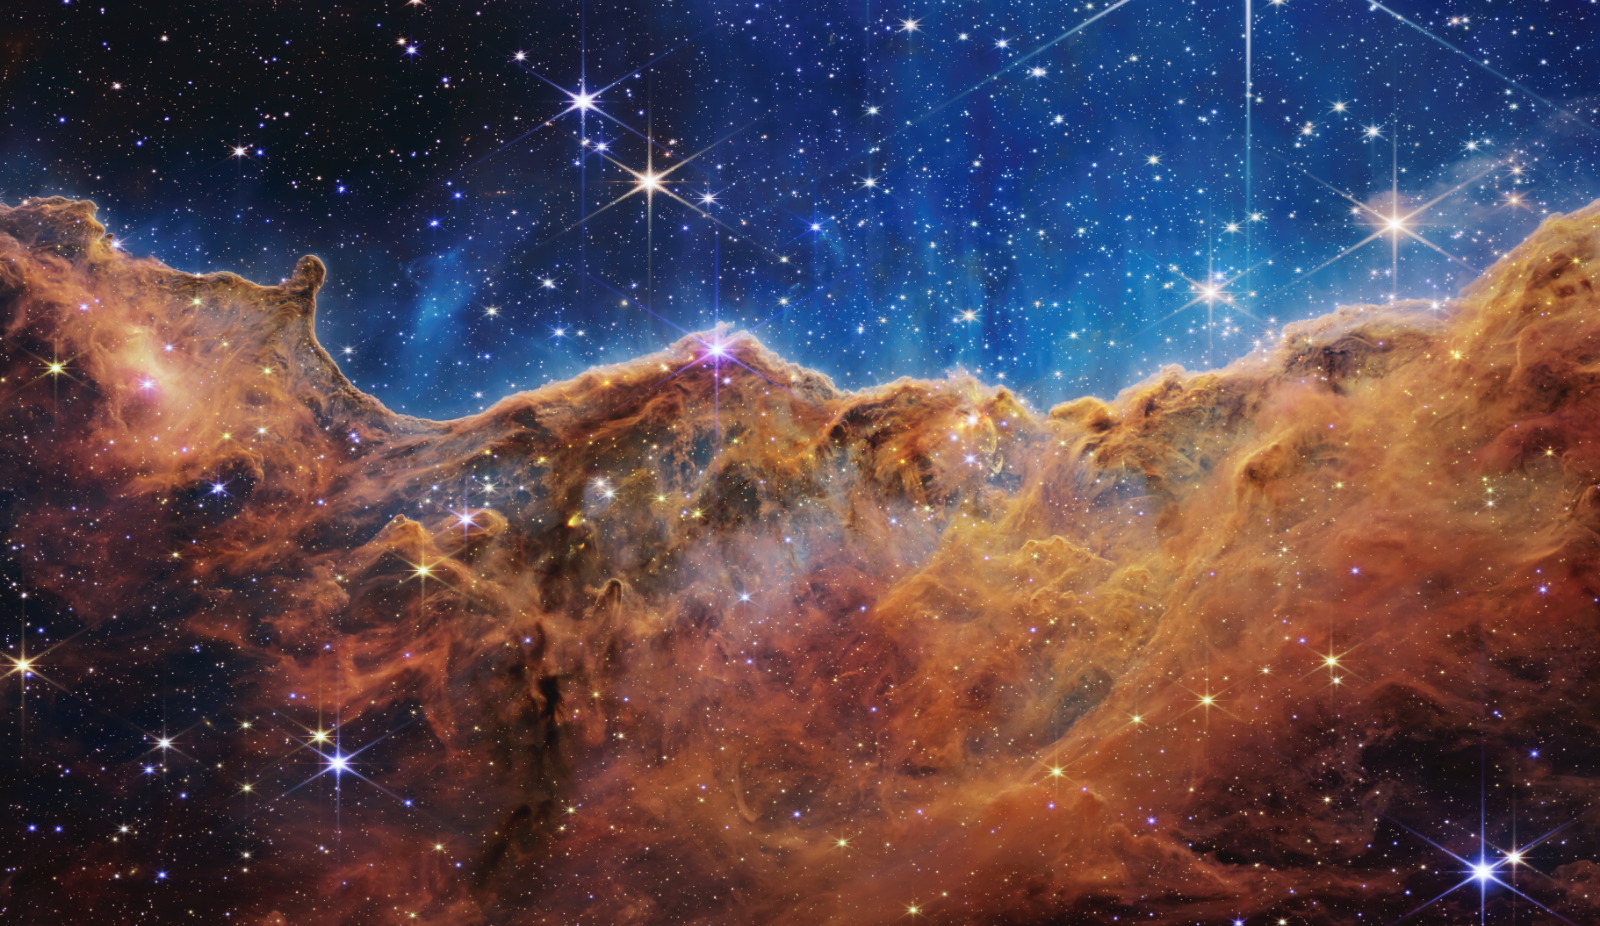 Cosmic Cliffs in the Carina Nebula (NIRCam Image) from the James Webb Telescope